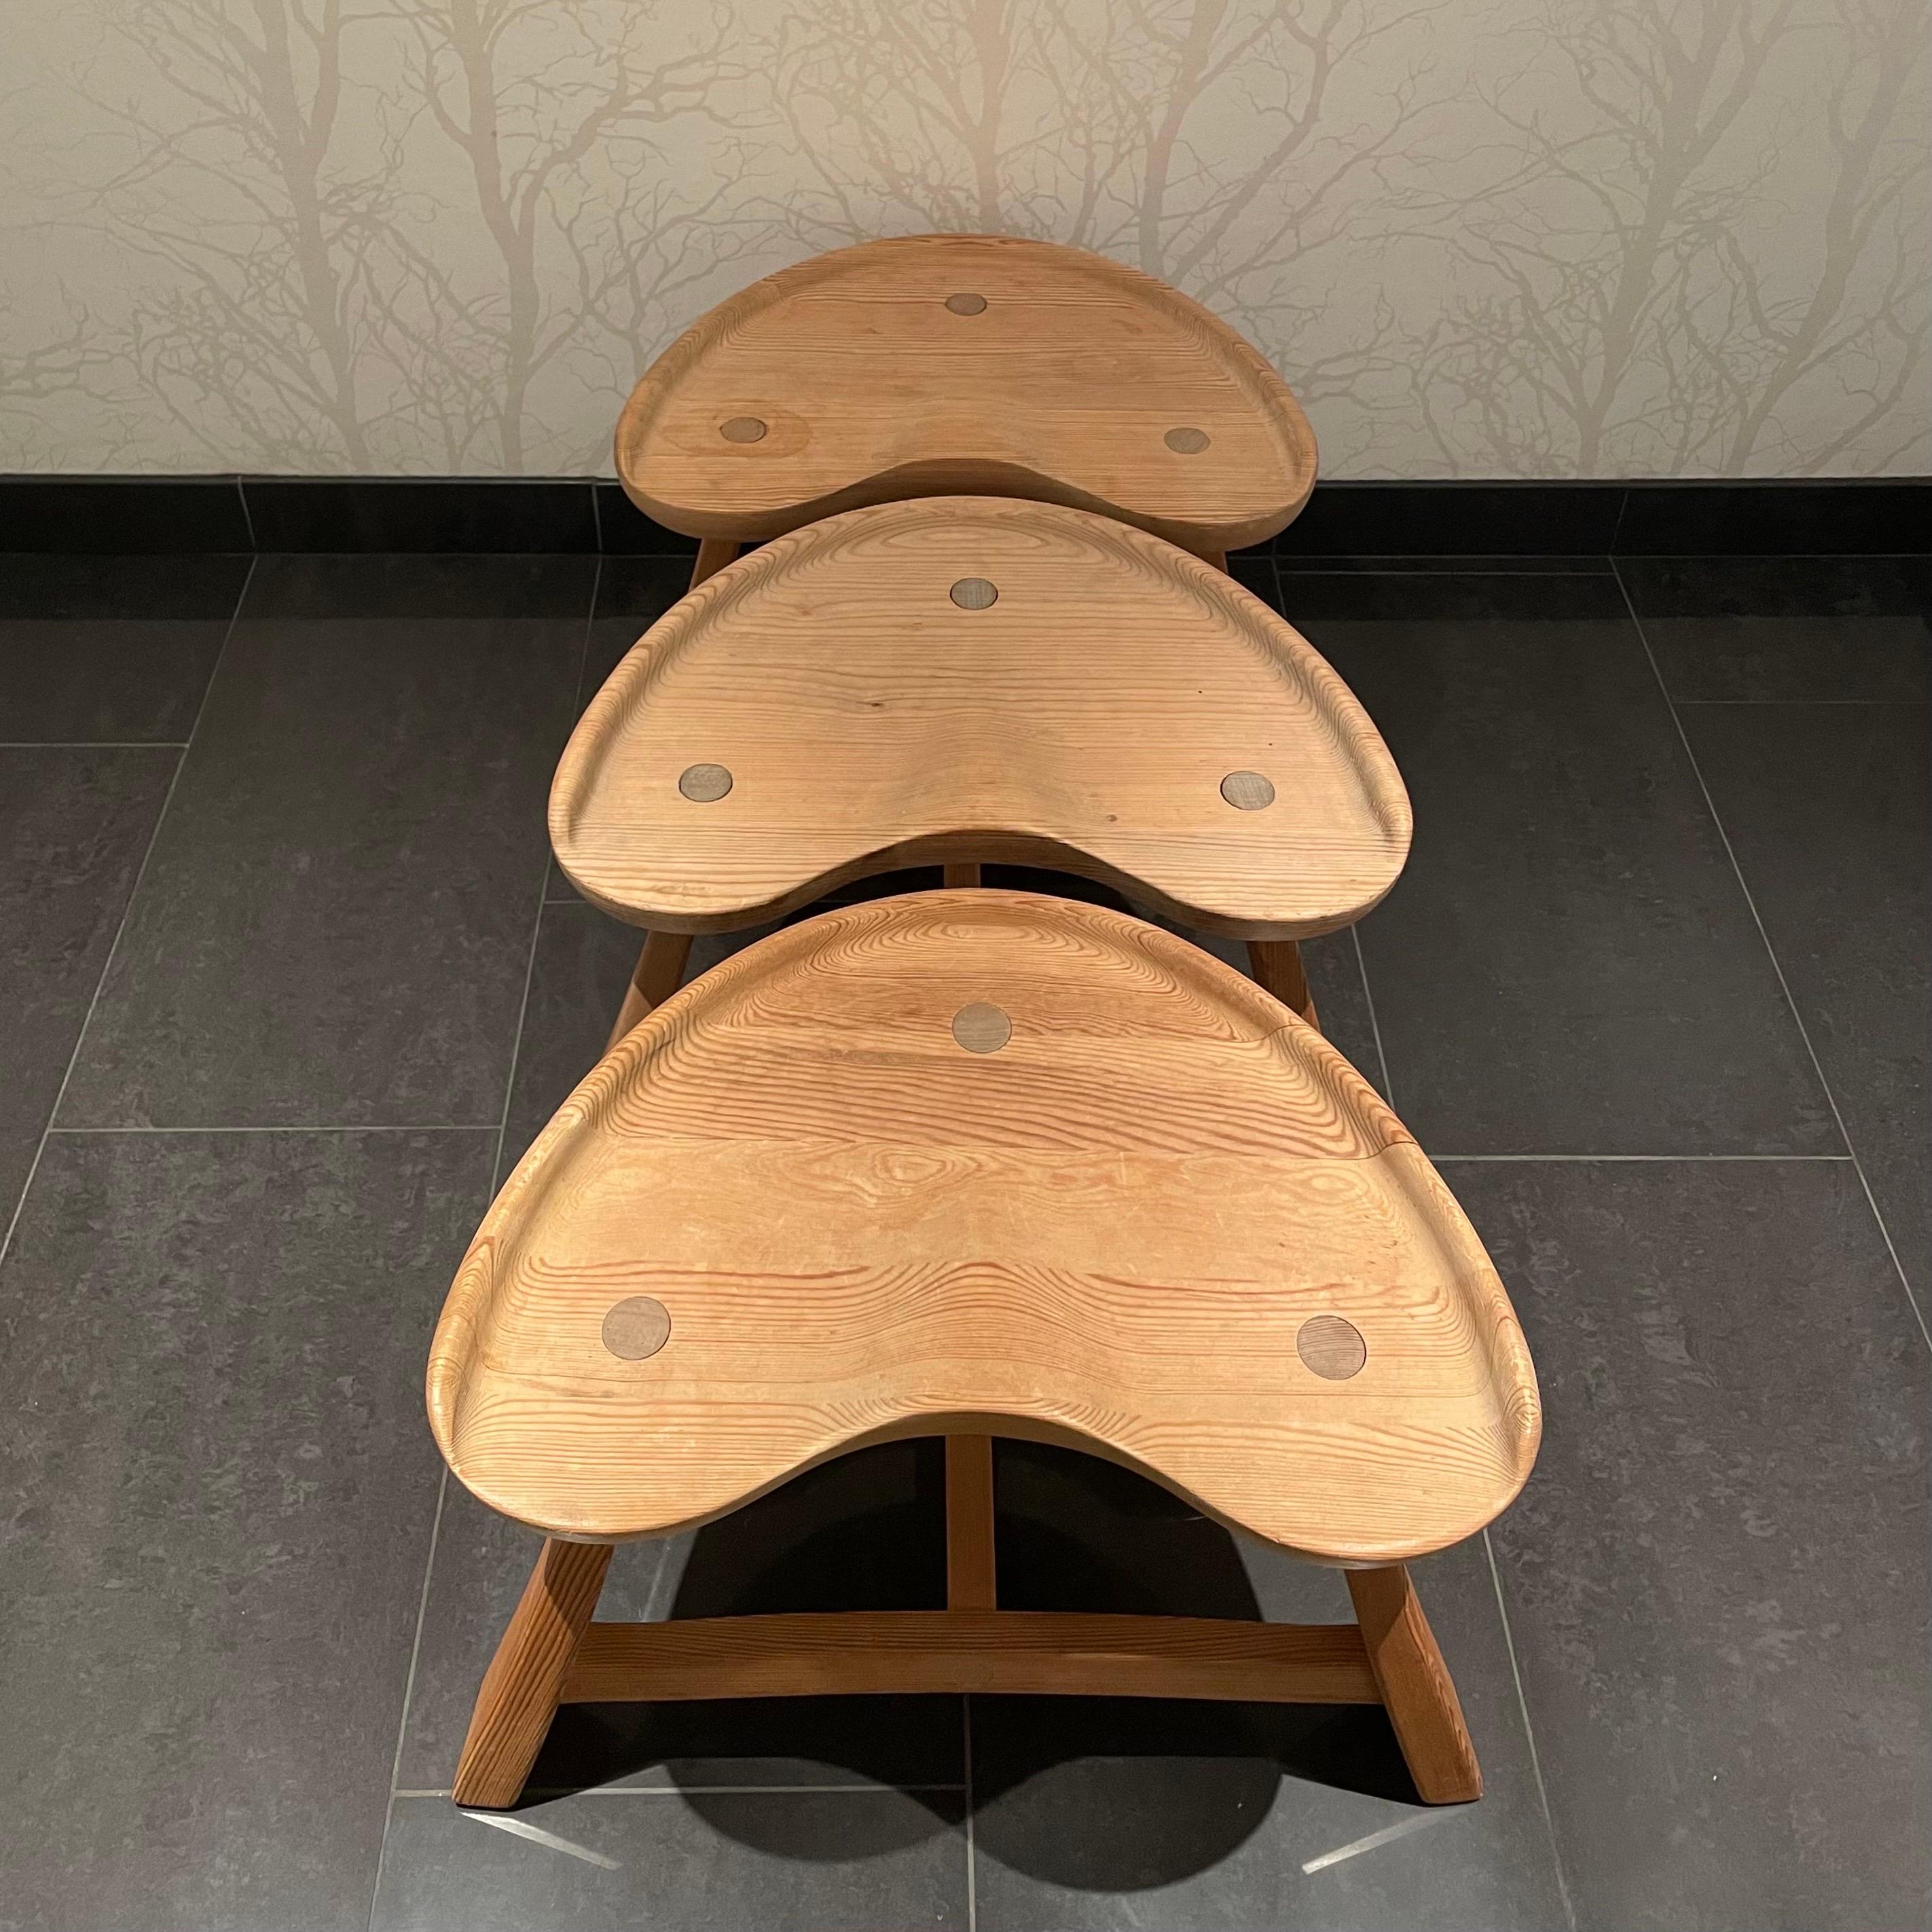 This is the Norwegian Krogenæs Möbler’s solid pine stool set of three, model nr 522.
It comes in a stable, three legged construction with patinated untreated surface. Two of the three stools are burn marked “Krogenæs Möbler” on the underside of the